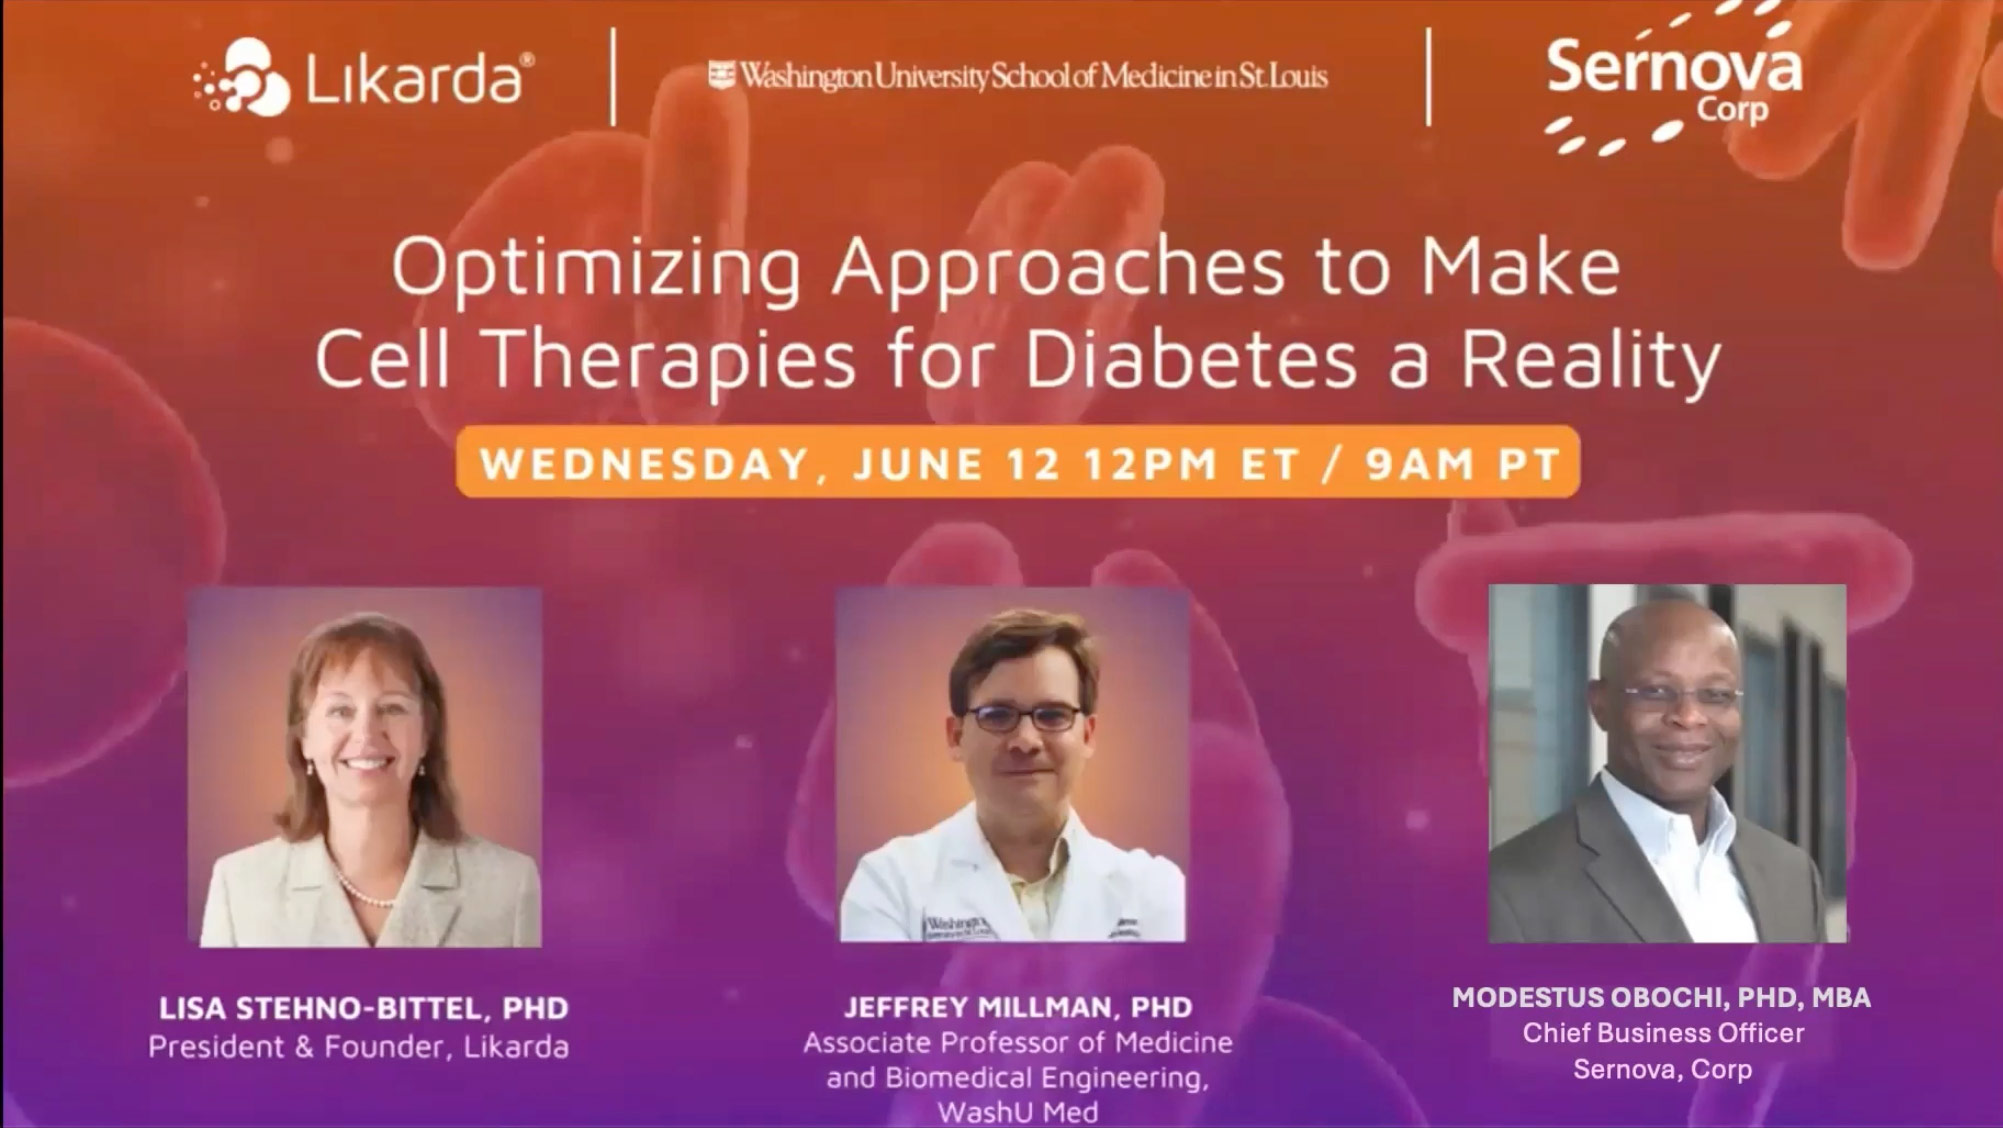 Optimizing Approaches to Make Cell Therapies for Diabetes a Reality